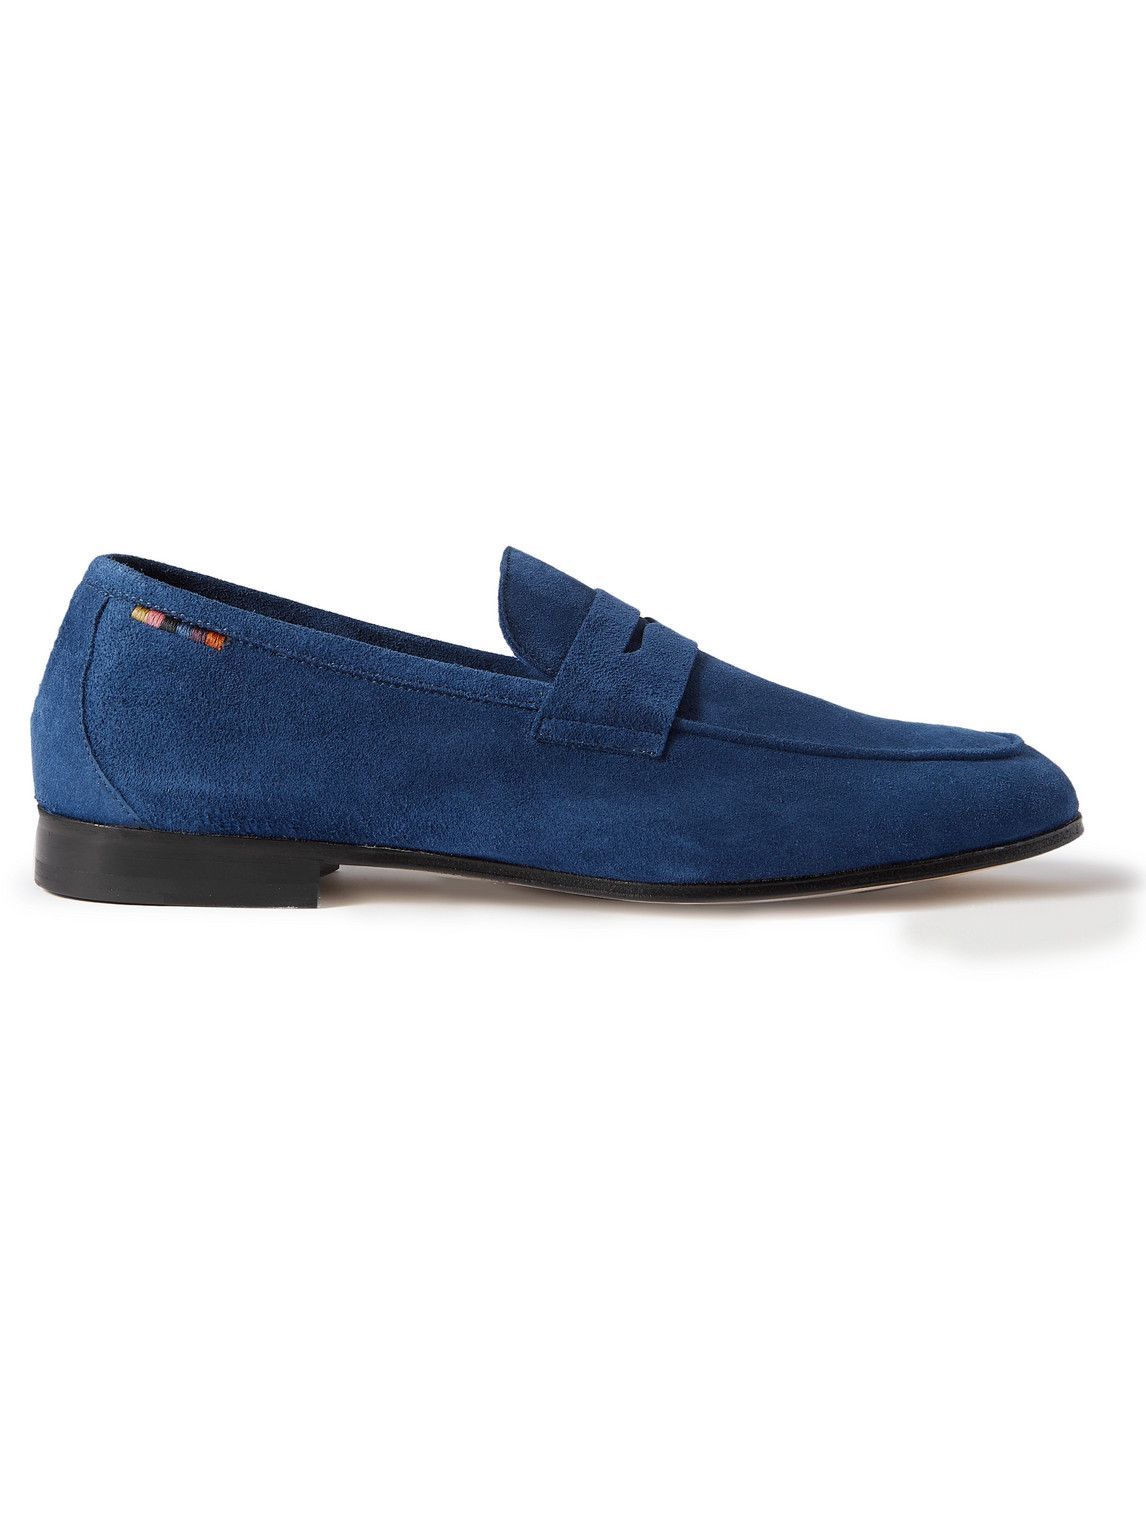 Paul Smith - Livino Suede Penny Loafers - Blue Paul Smith